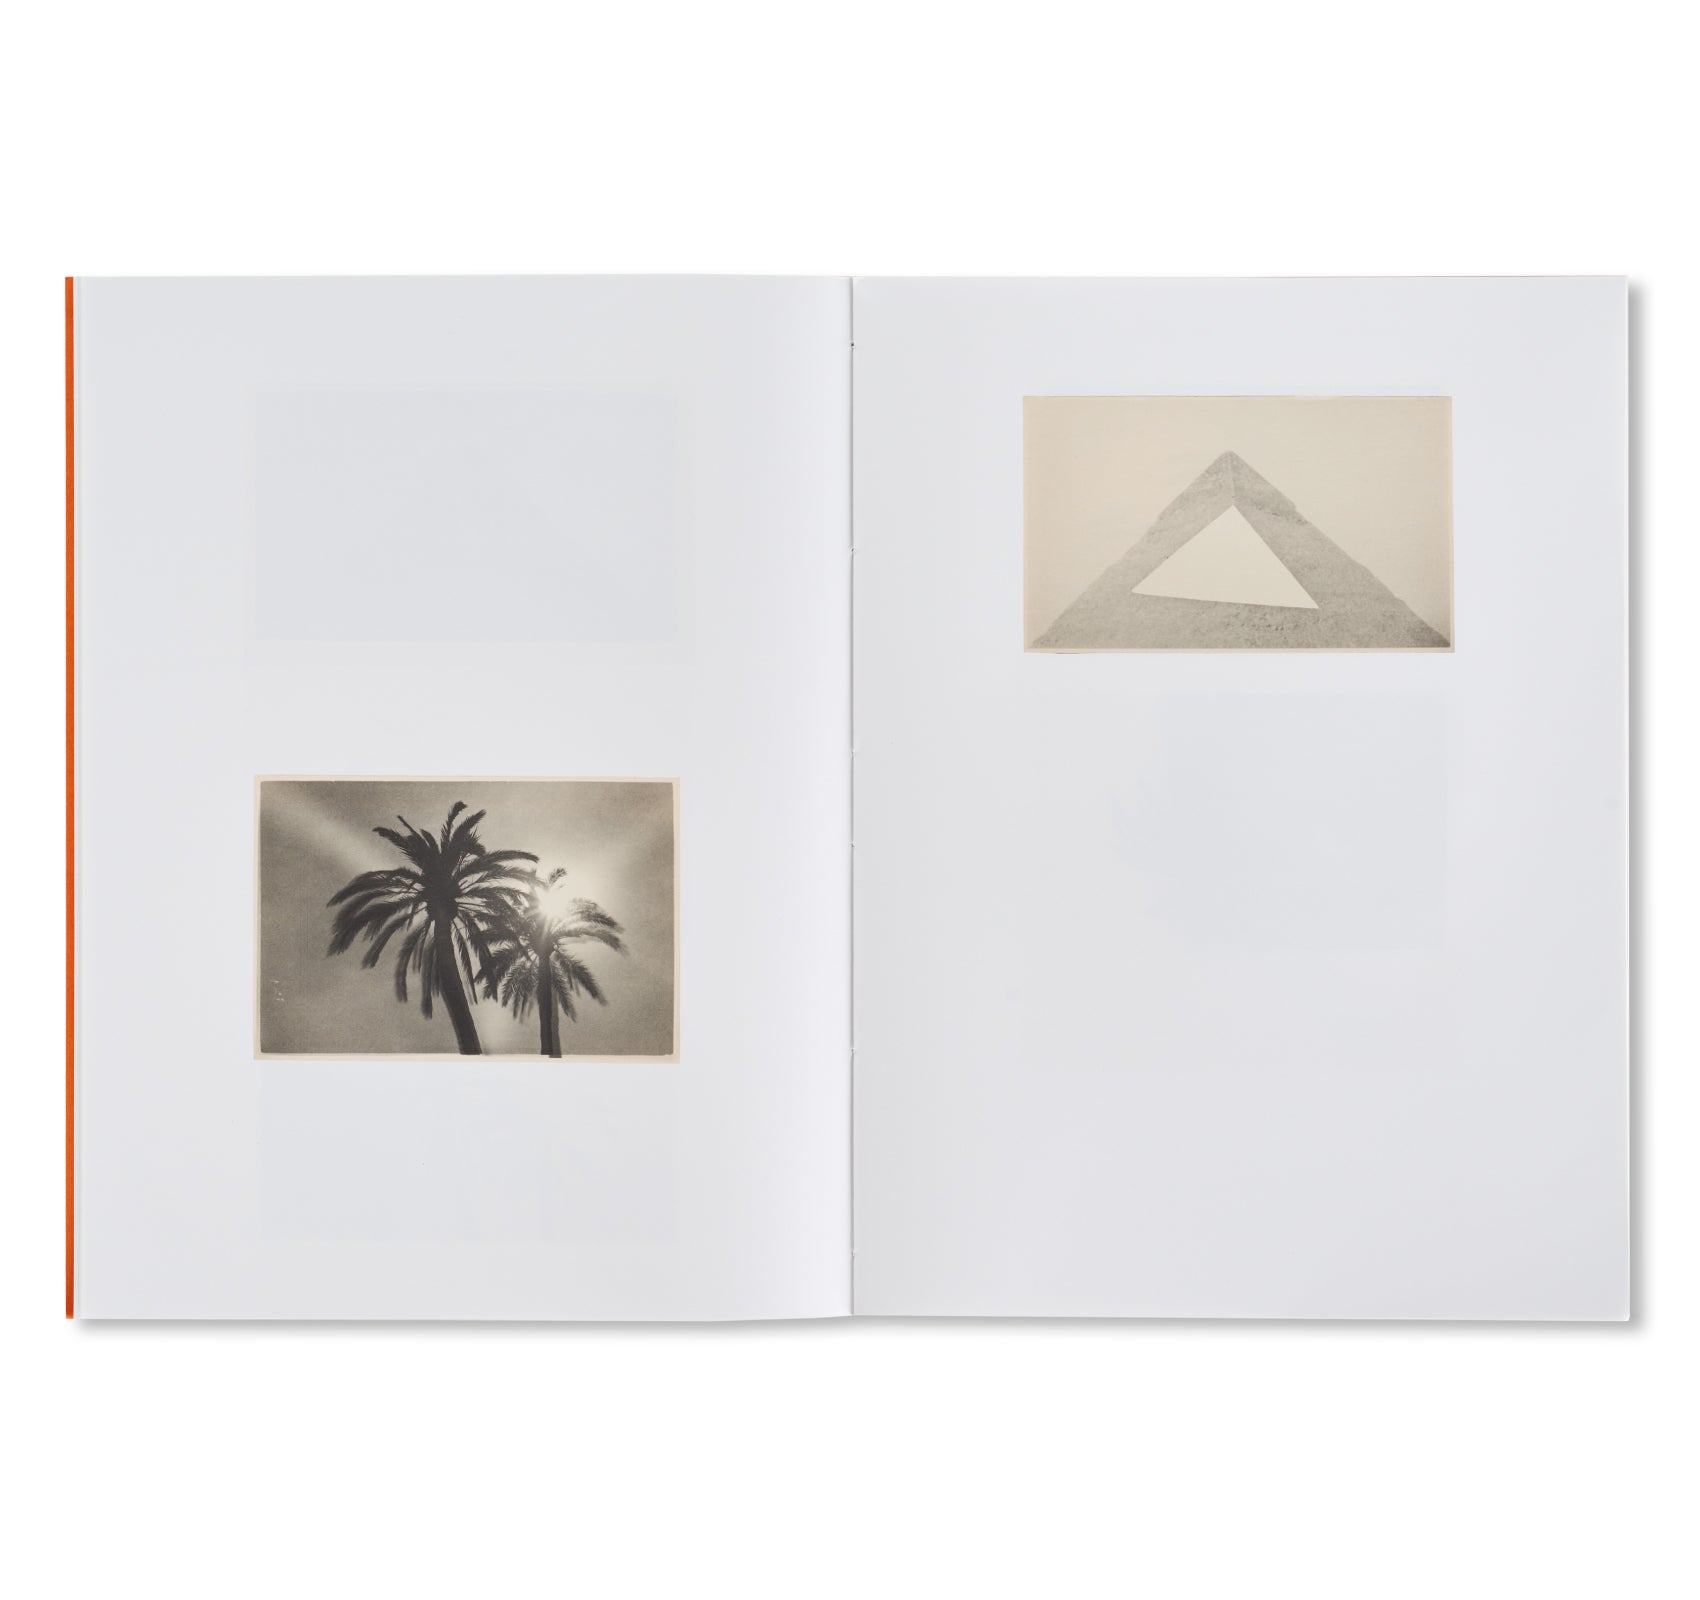 THE PYRAMIDS AND PALM TREES TEST by Bruno V. Roels